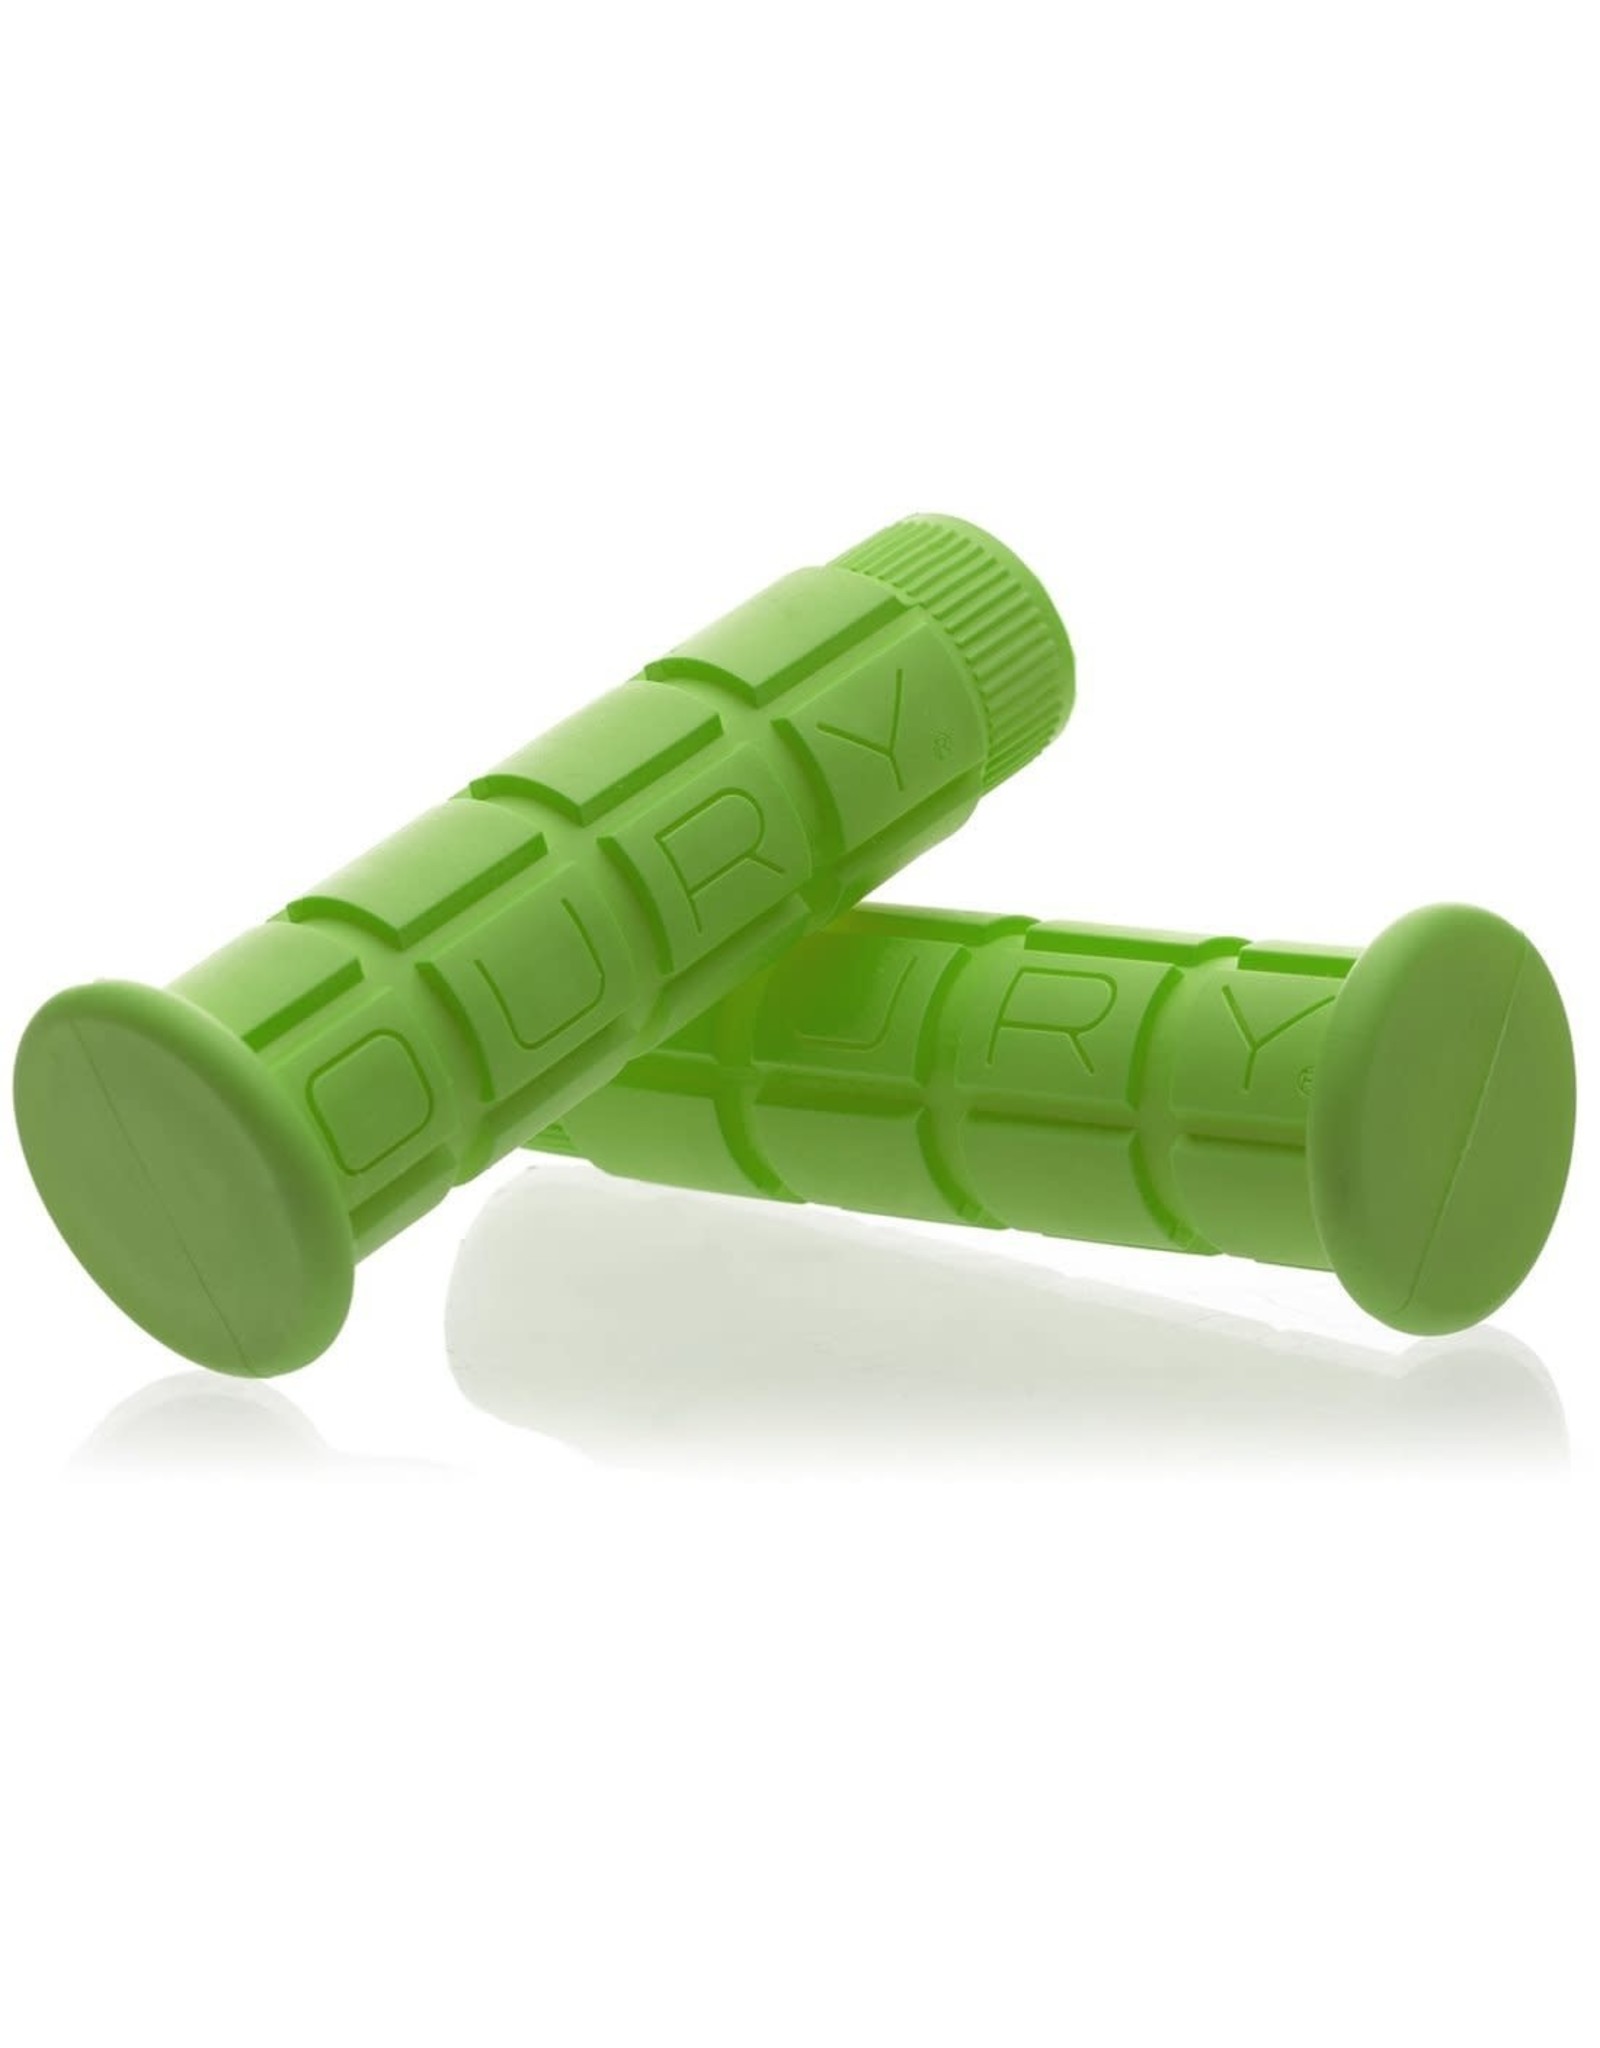 OURY OURY - MOUNTAIN GRIPS - GREEN